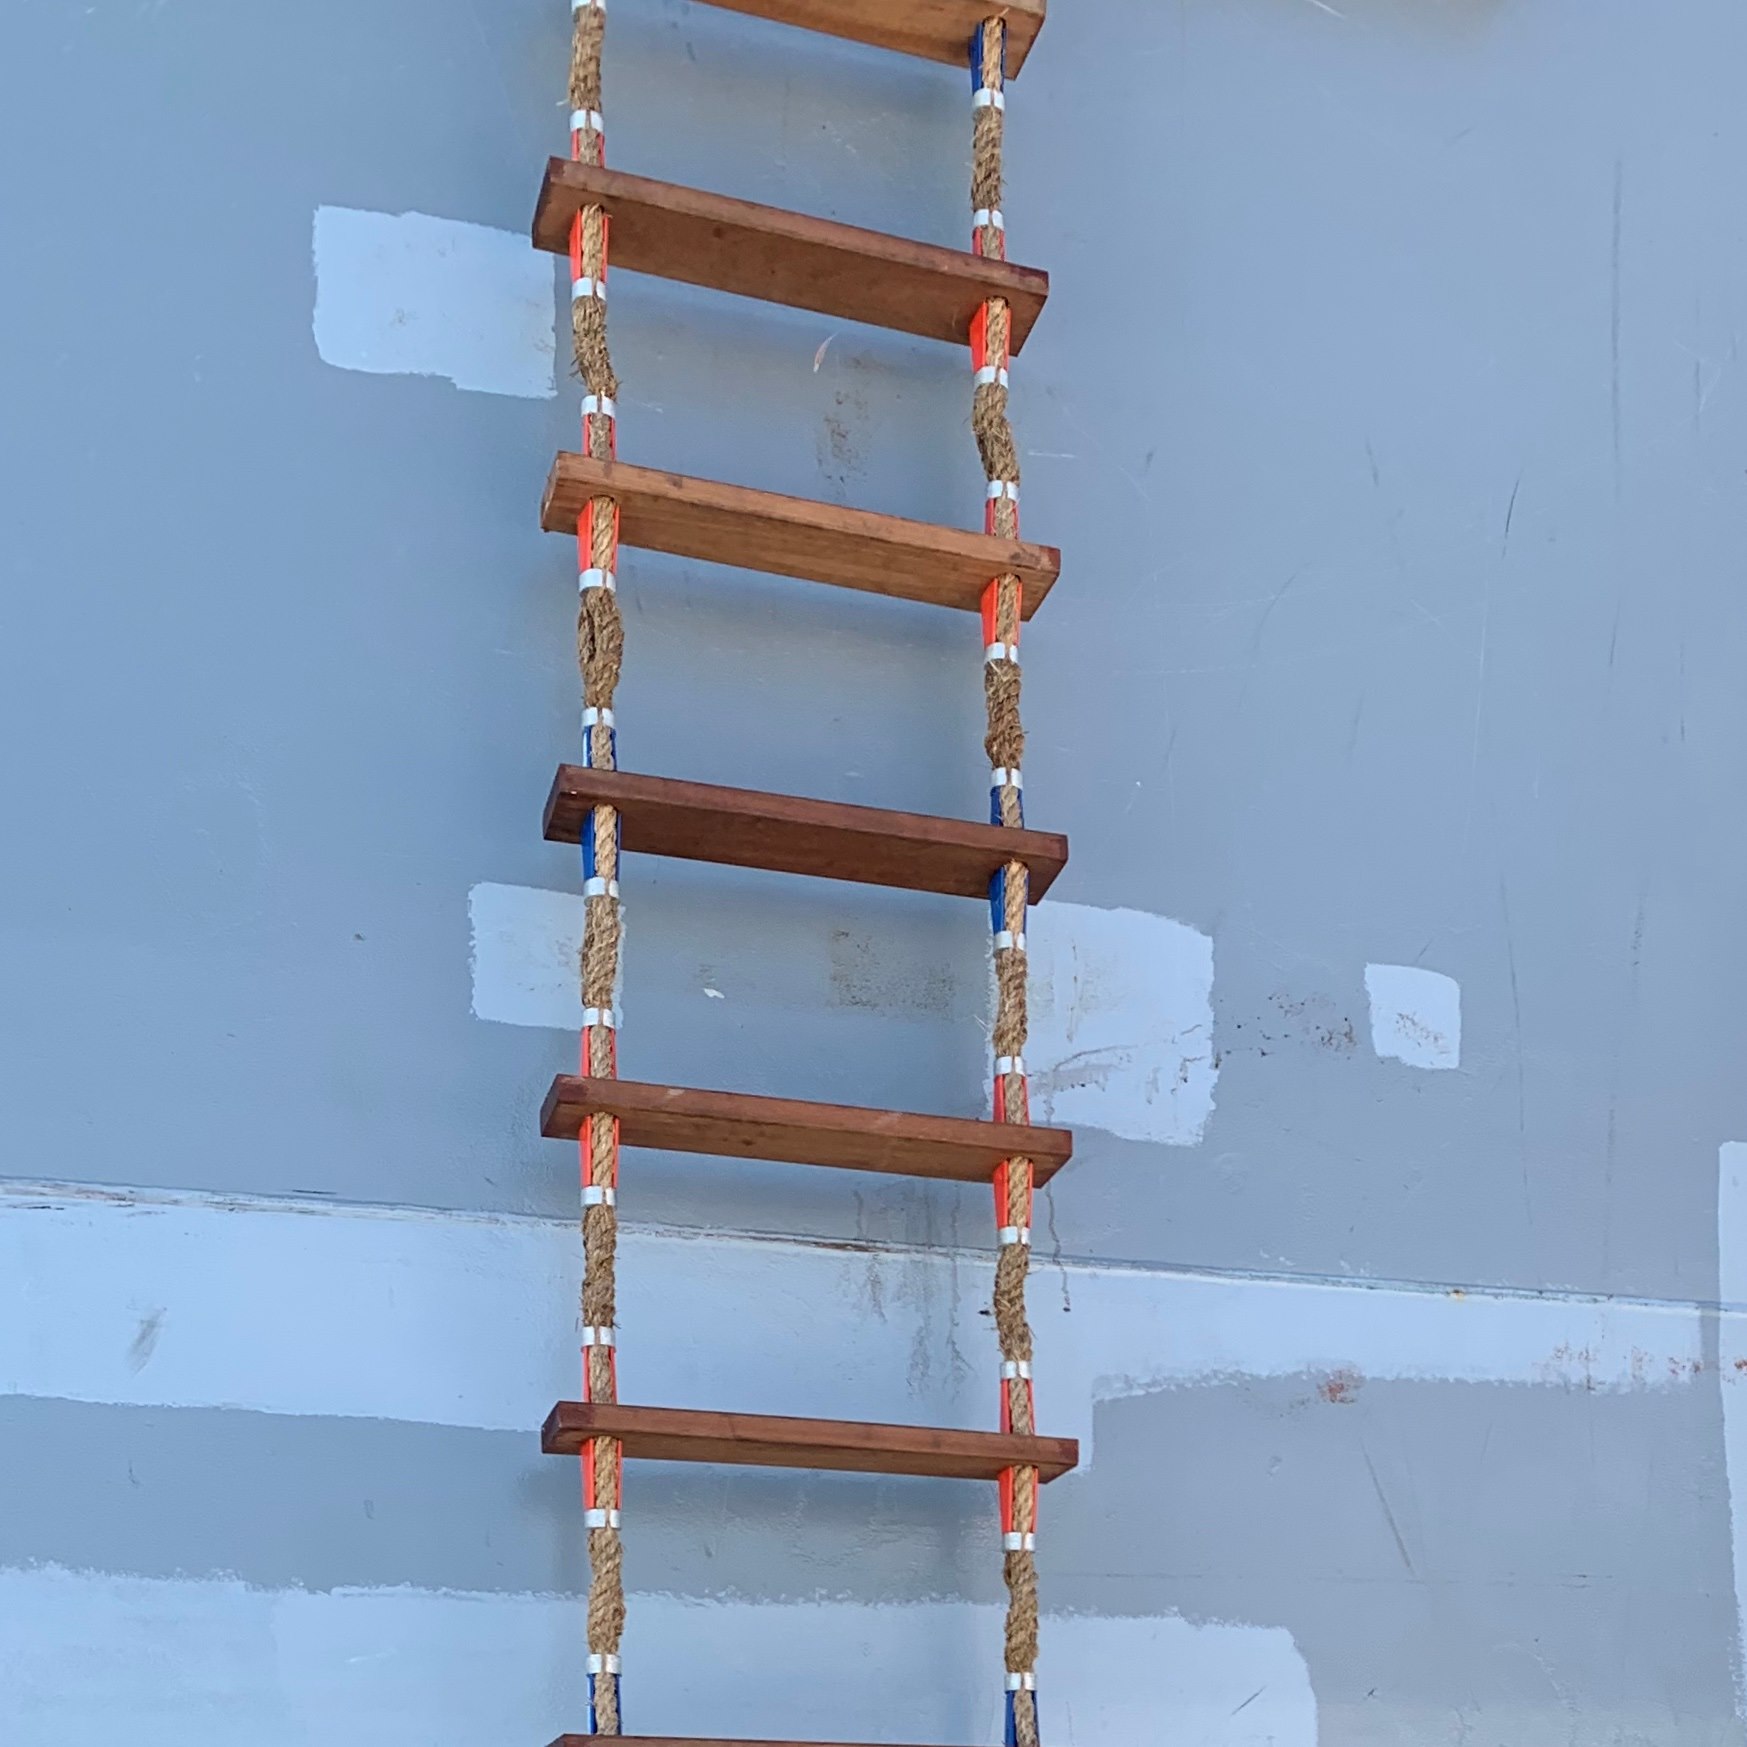 How To Make A Rope Ladder With Wood Steps